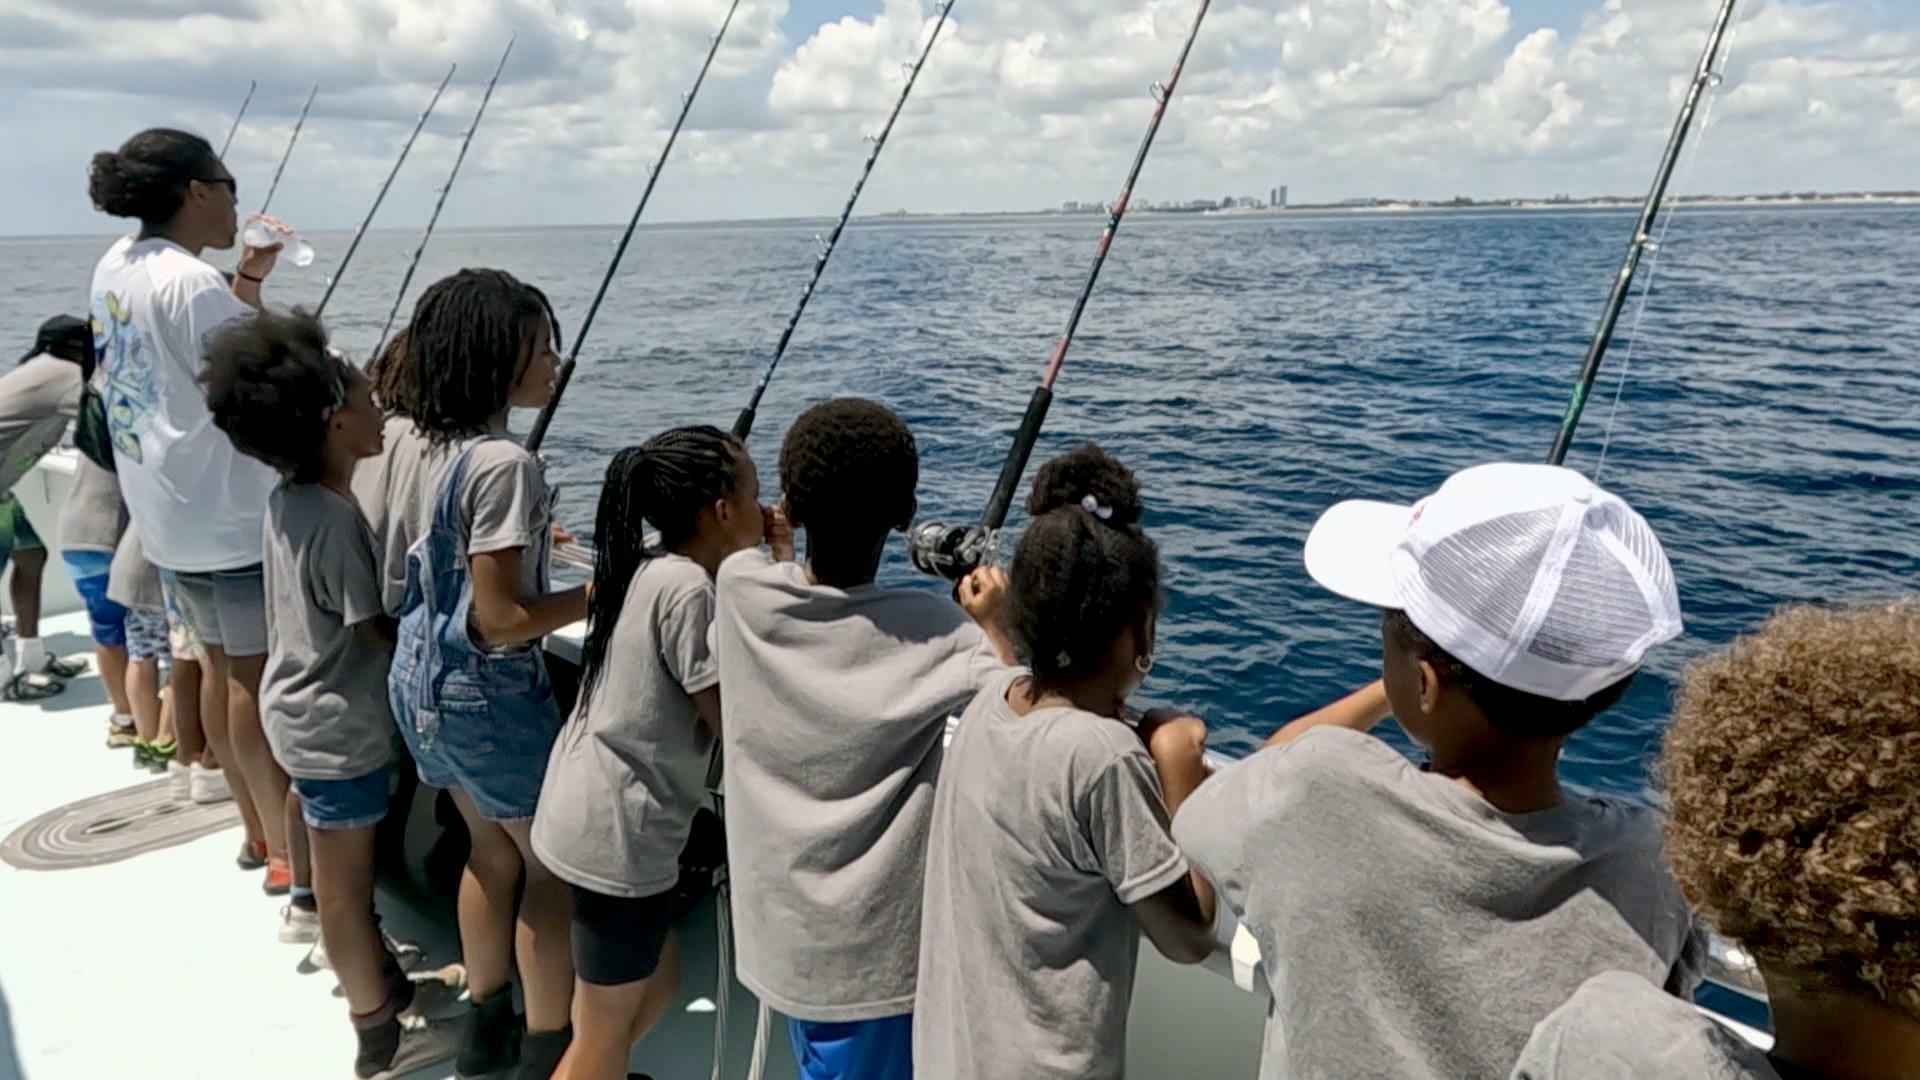 Watch CBS Saturday Morning: The mission of Florida Fishing